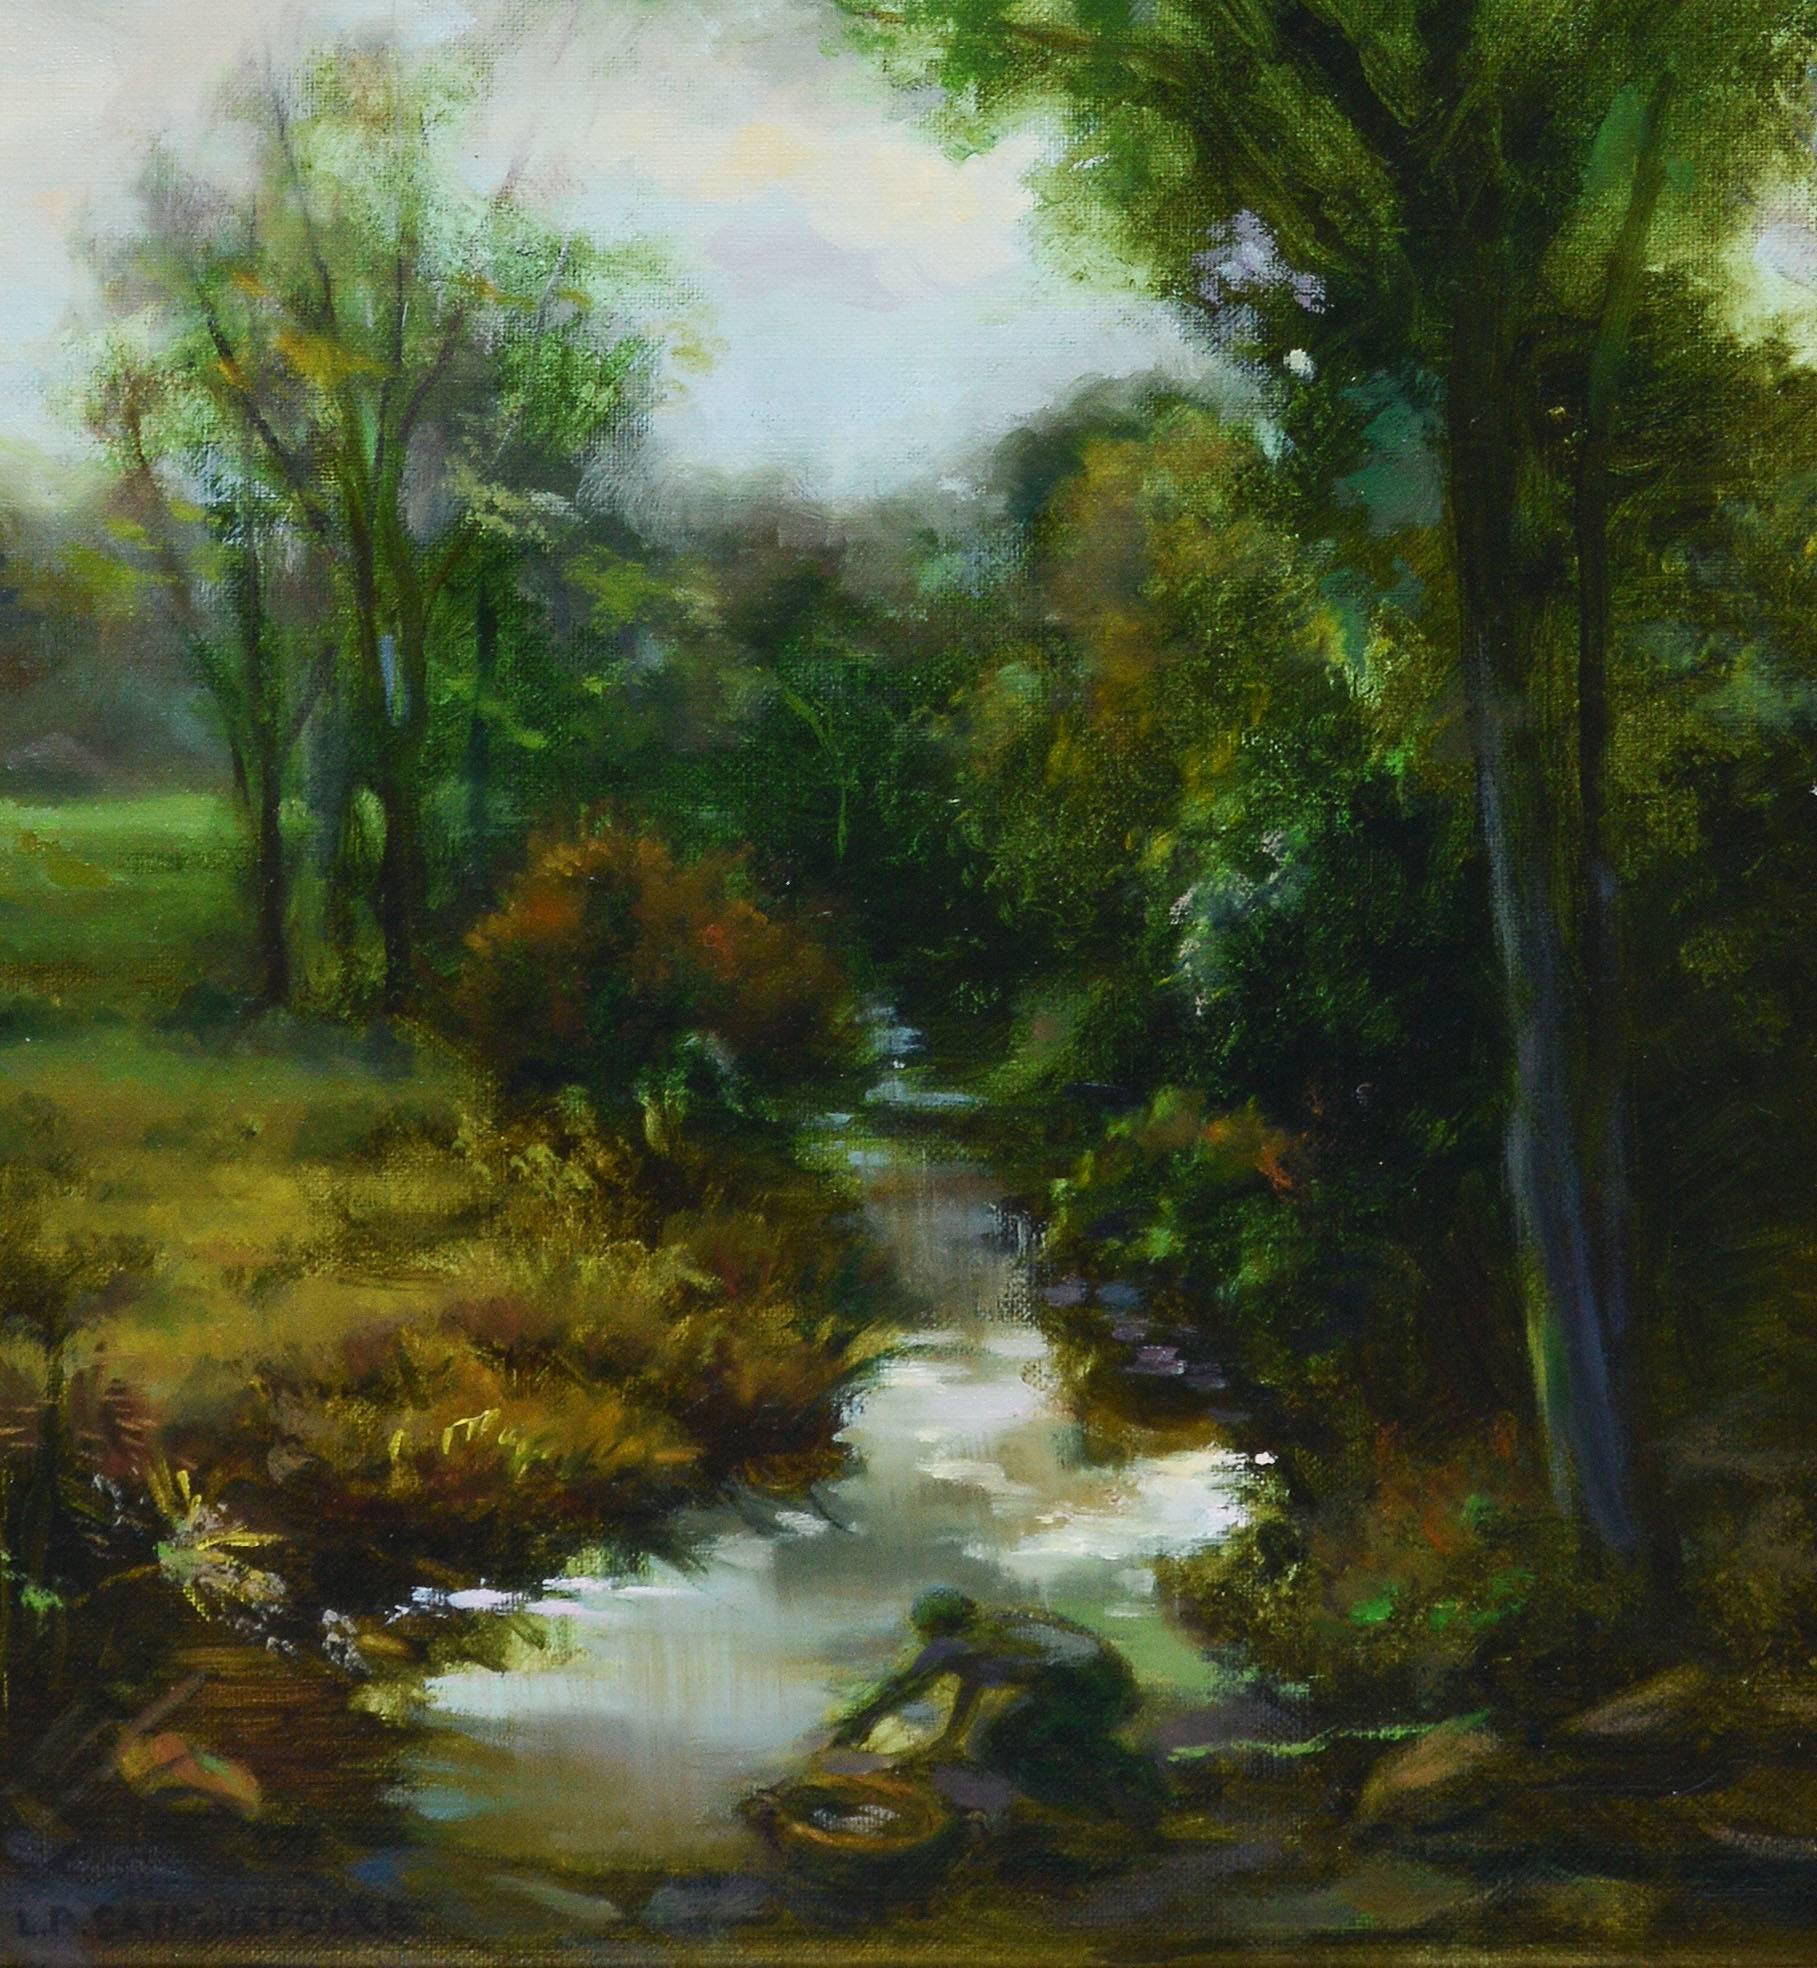 Landscape with a Stream - Brown Landscape Painting by Unknown